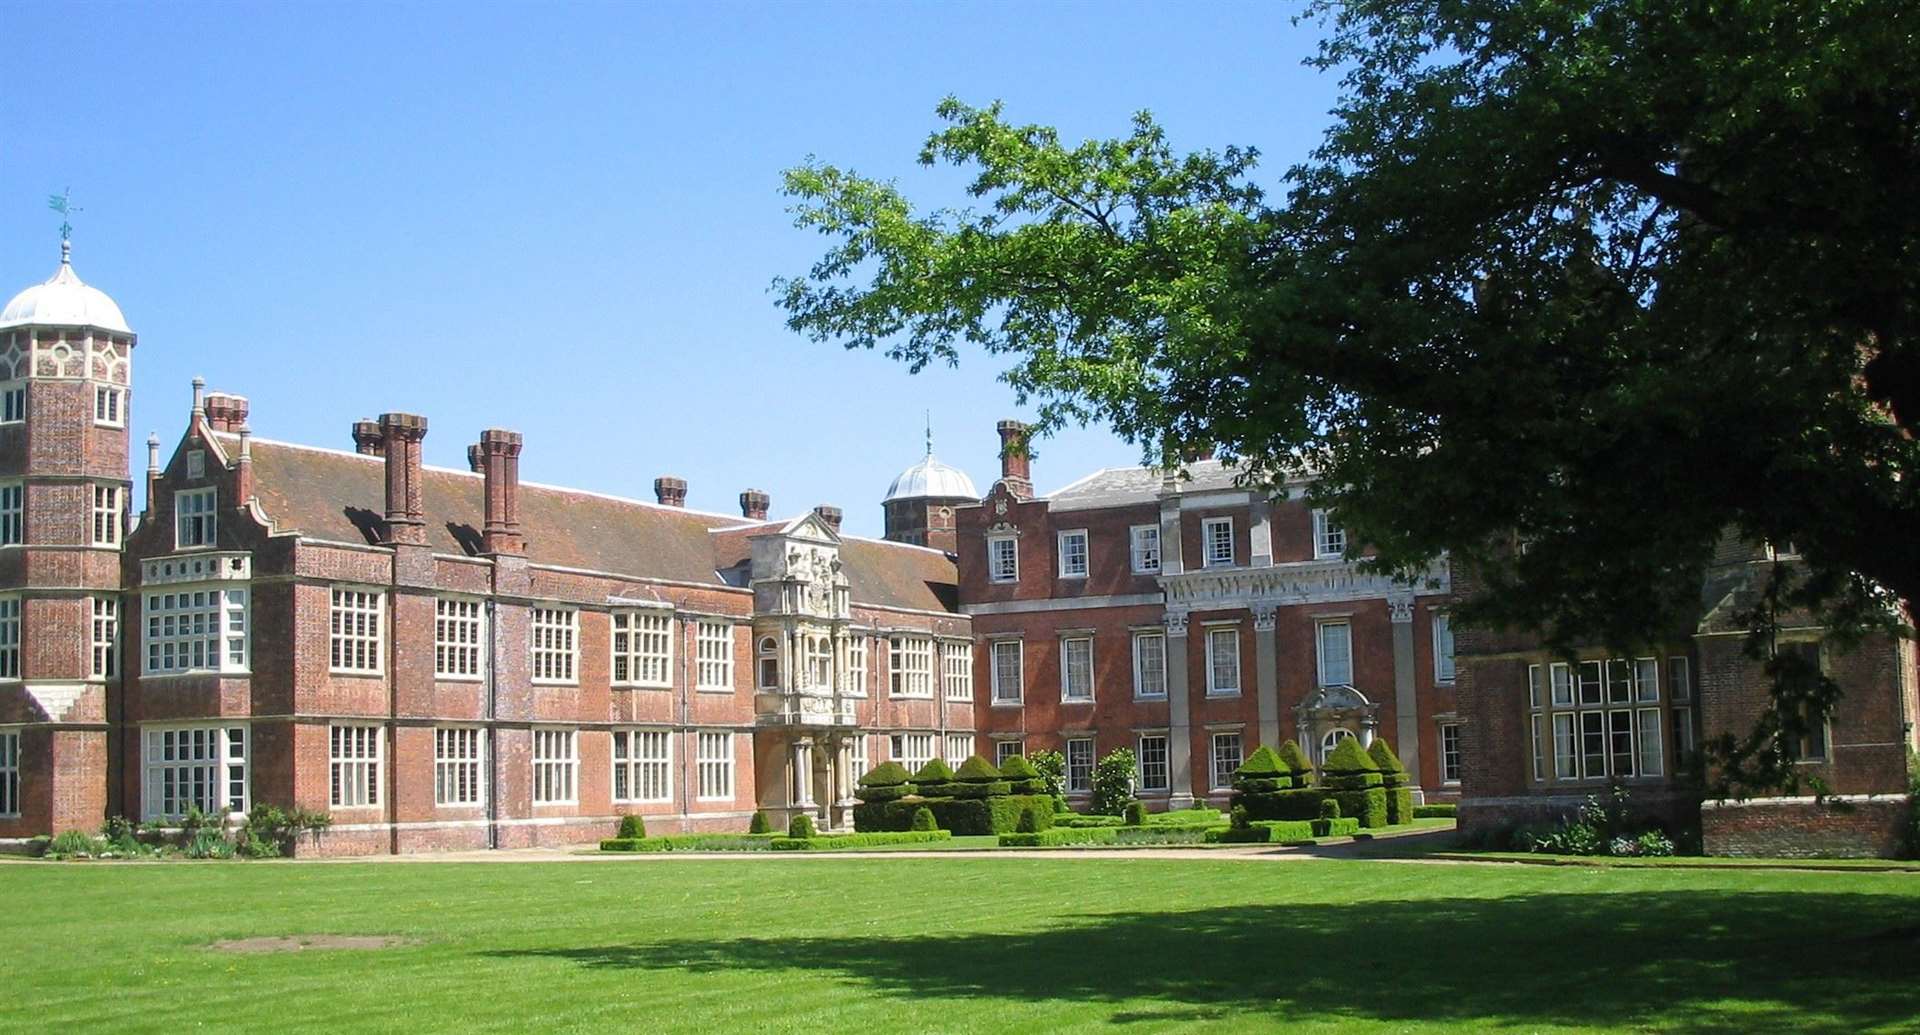 Cobham Hall School was the setting for Wild Child. Picture: Chris Steel/ Gravesham Borough Council